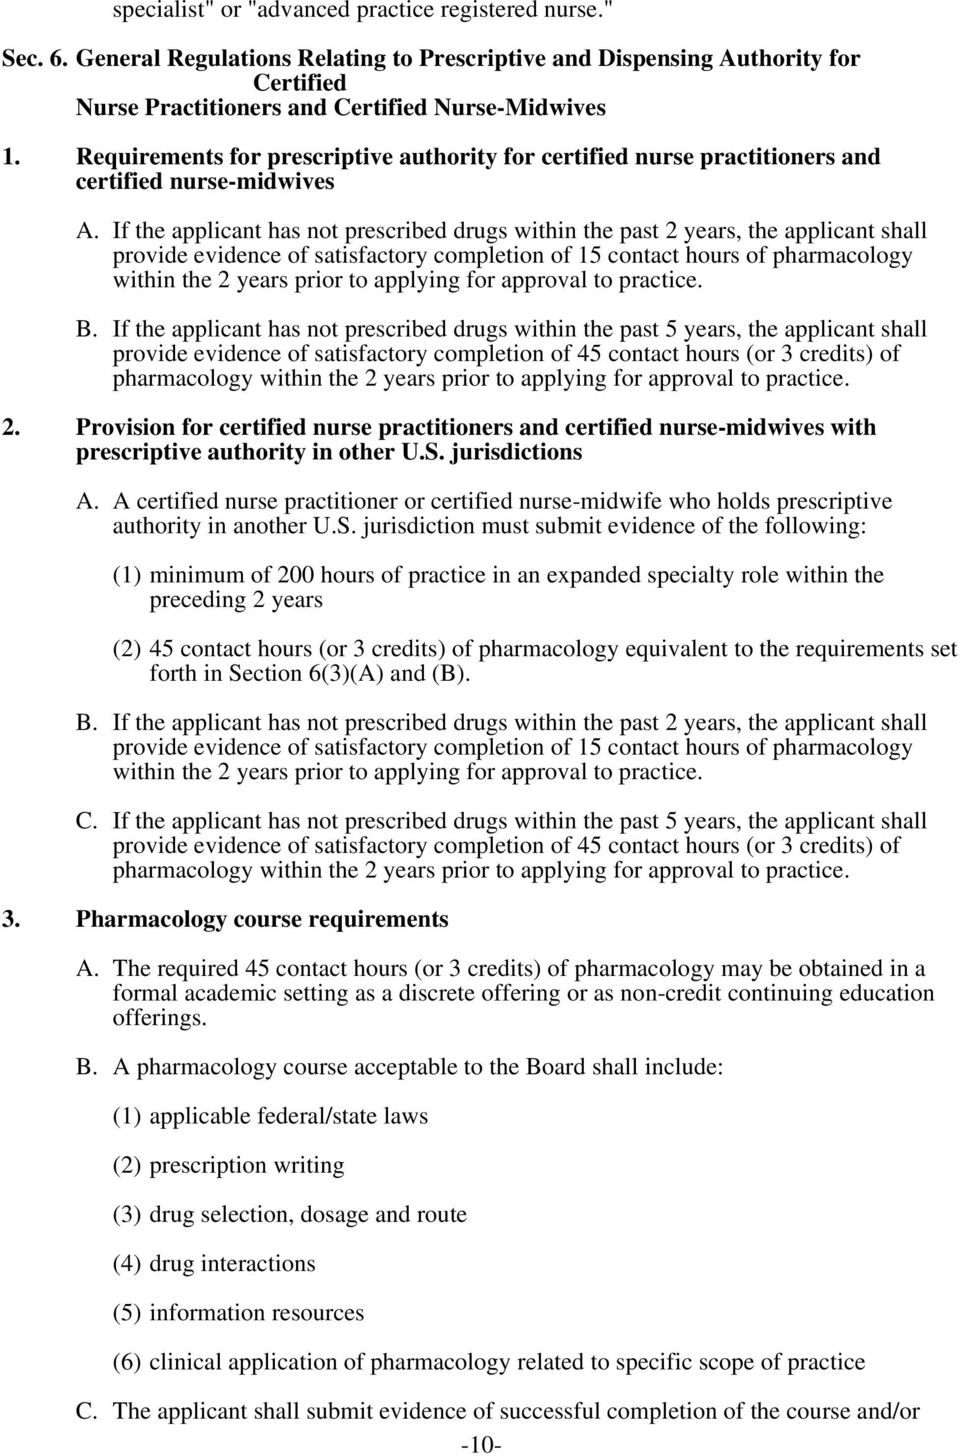 If the applicant has not prescribed drugs within the past 2 years, the applicant shall provide evidence of satisfactory completion of 15 contact hours of pharmacology within the 2 years prior to